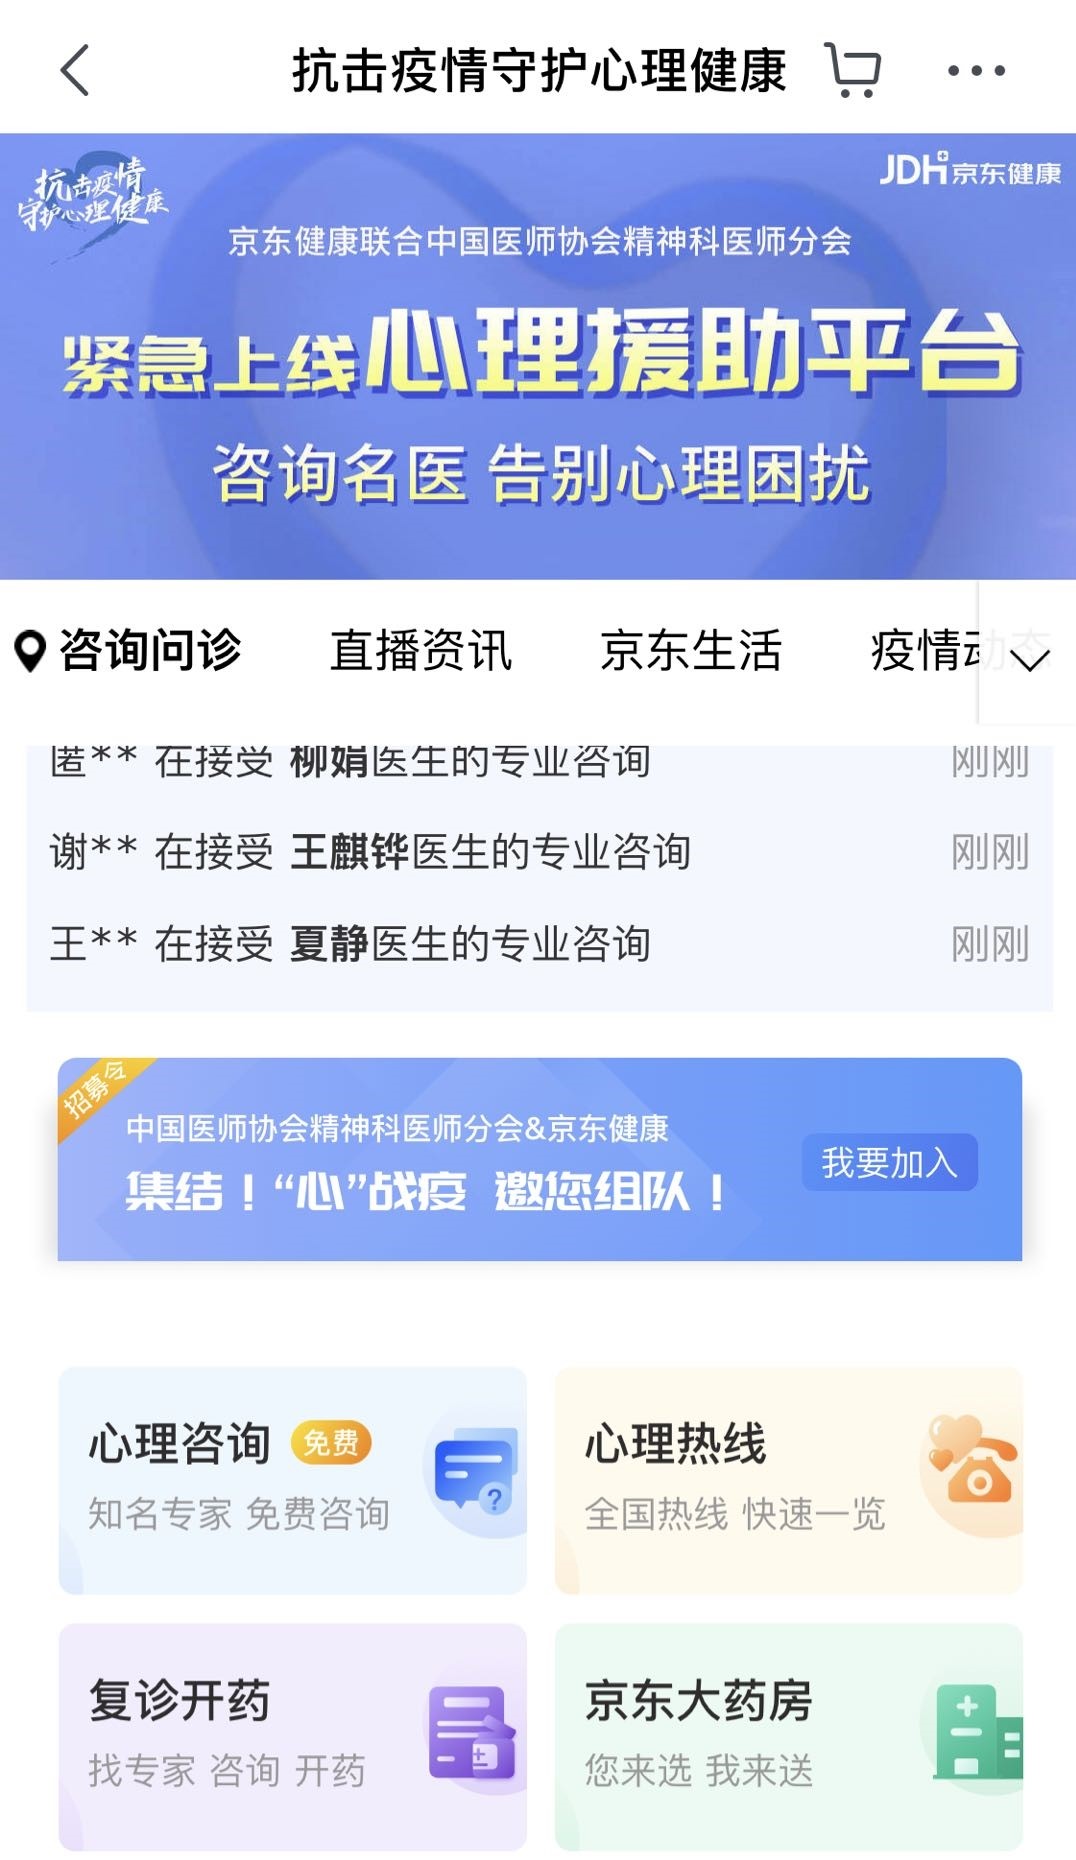 JD Health, together with the Chinese Psychiatrist Association, set up a psychological consultation platform within the JD app